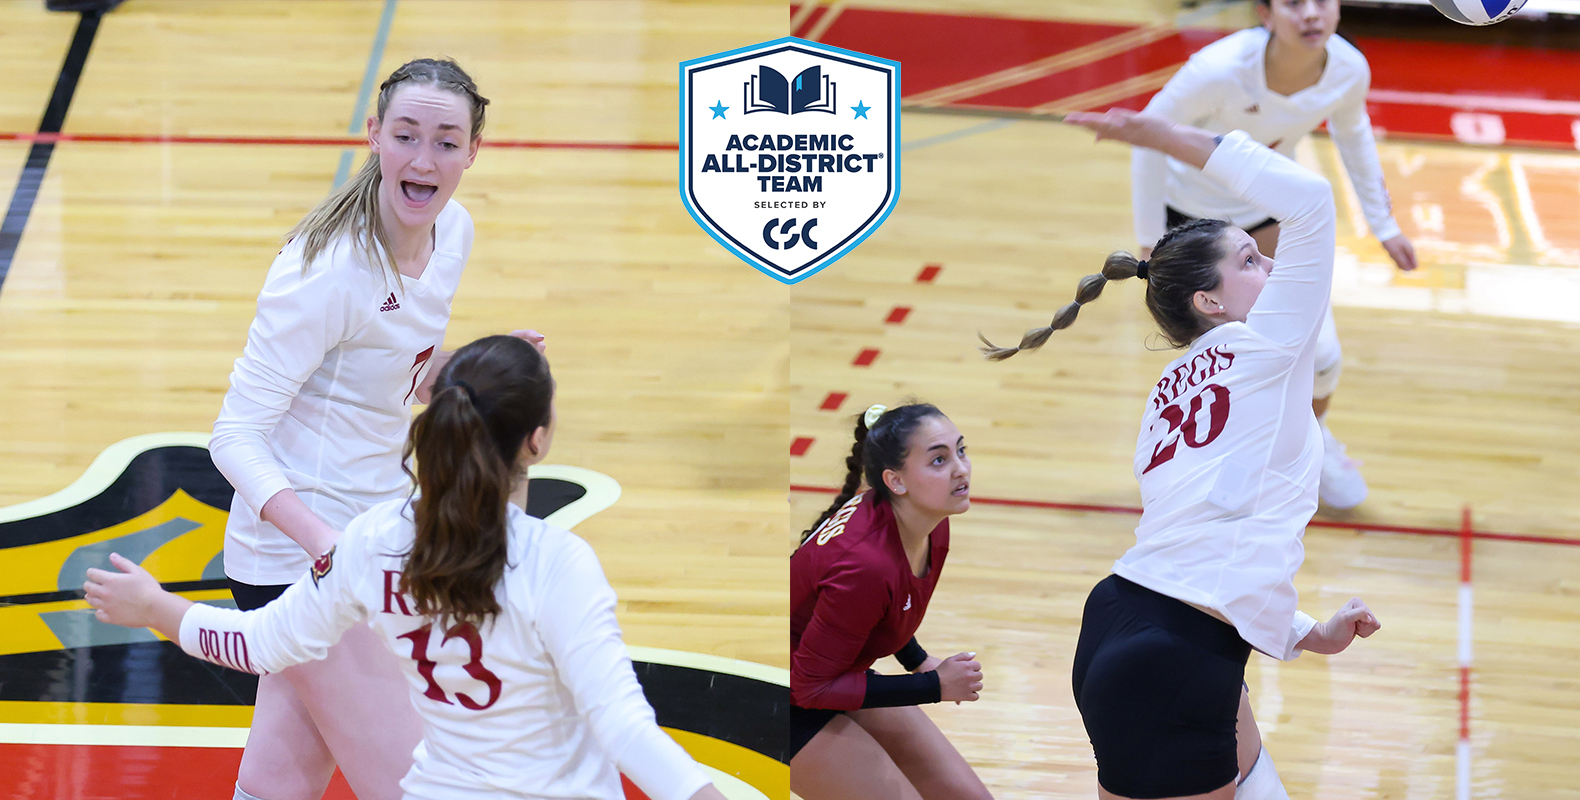 Rita Dow, Kate Montigny Named Academic All-District®